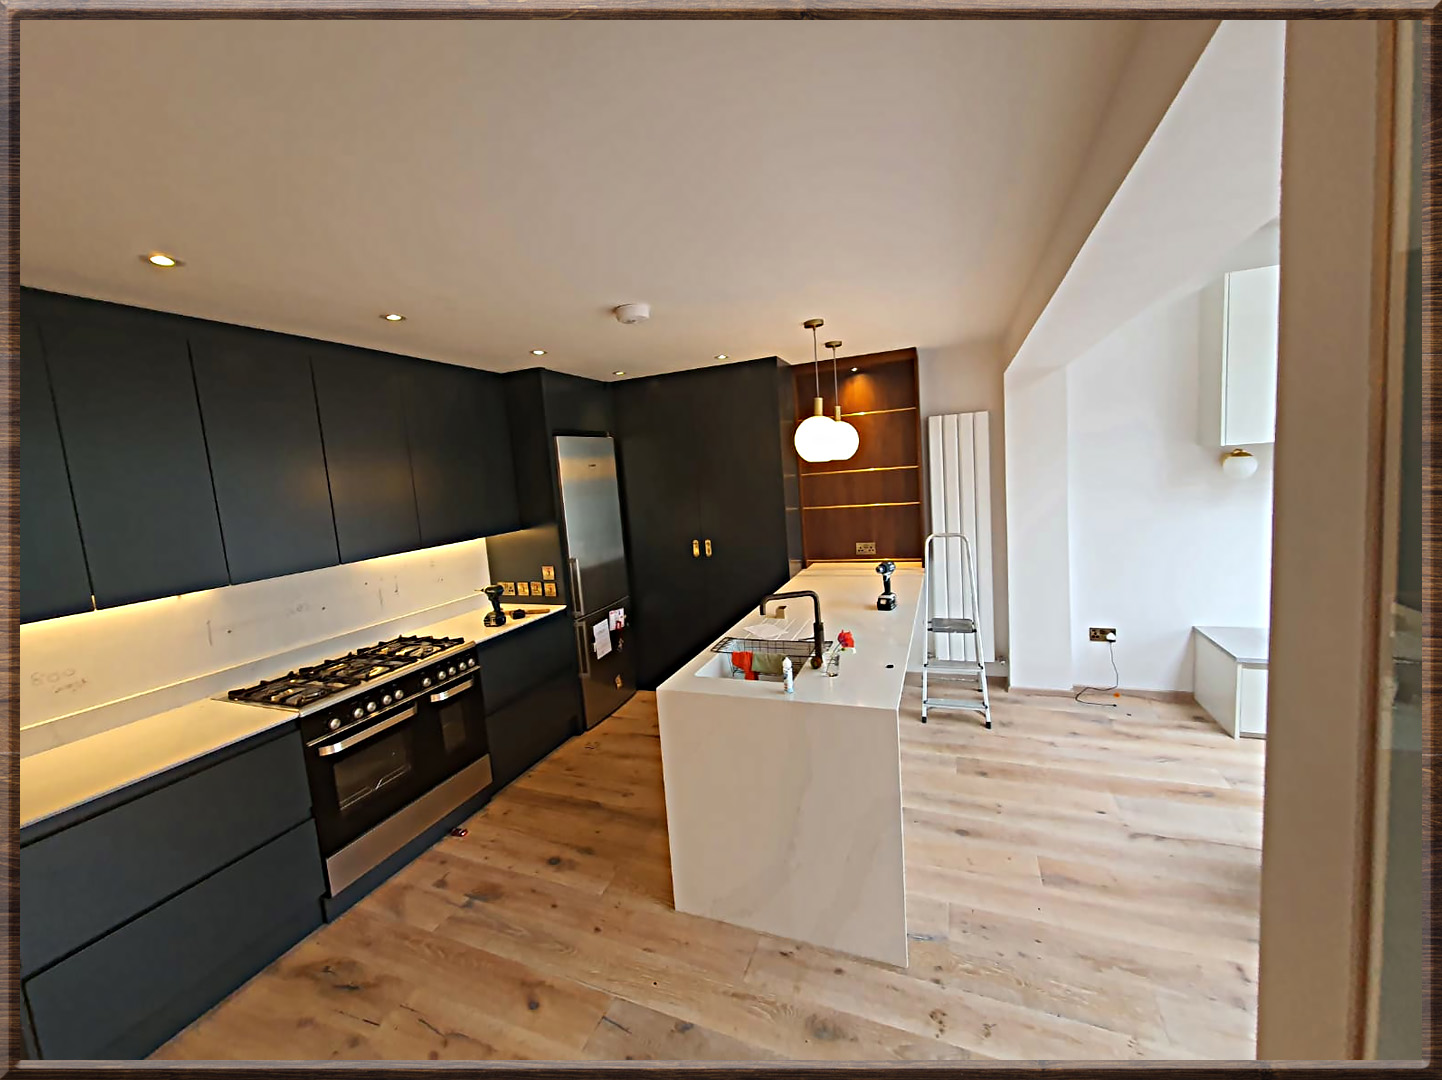 BG Carpentry Services fitted kitchens